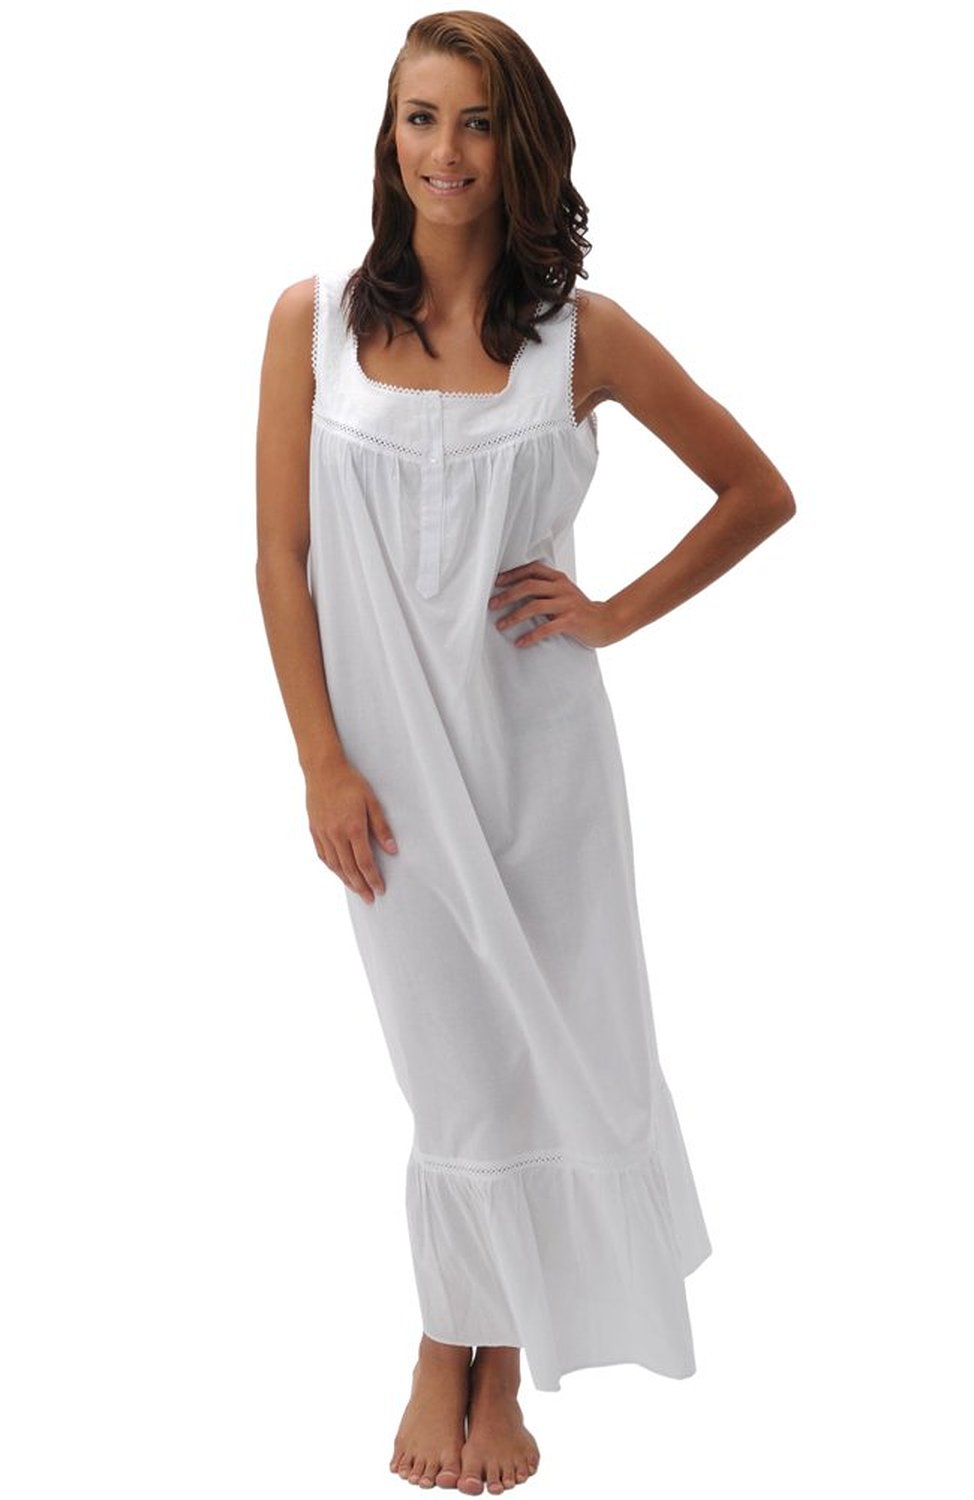 Cotton nightgowns for ladies – Indian wedding attire for female guests